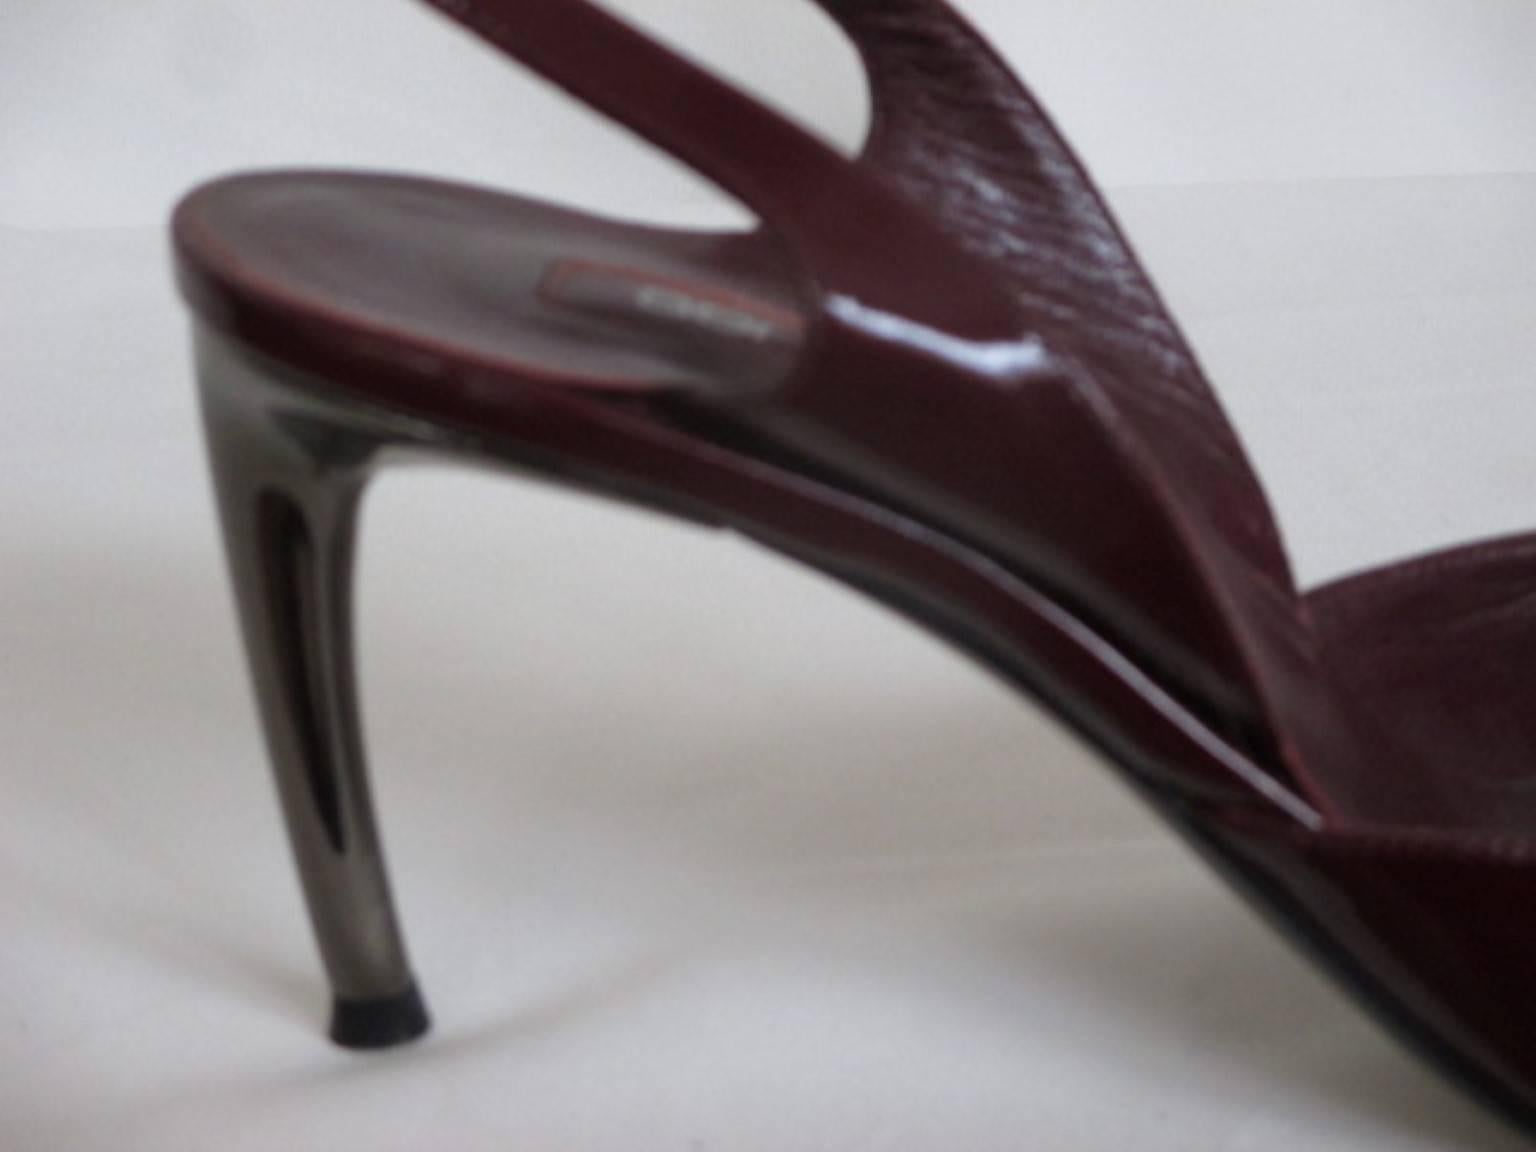 Black sergio rossi red bordeaux slingback patent leather pump